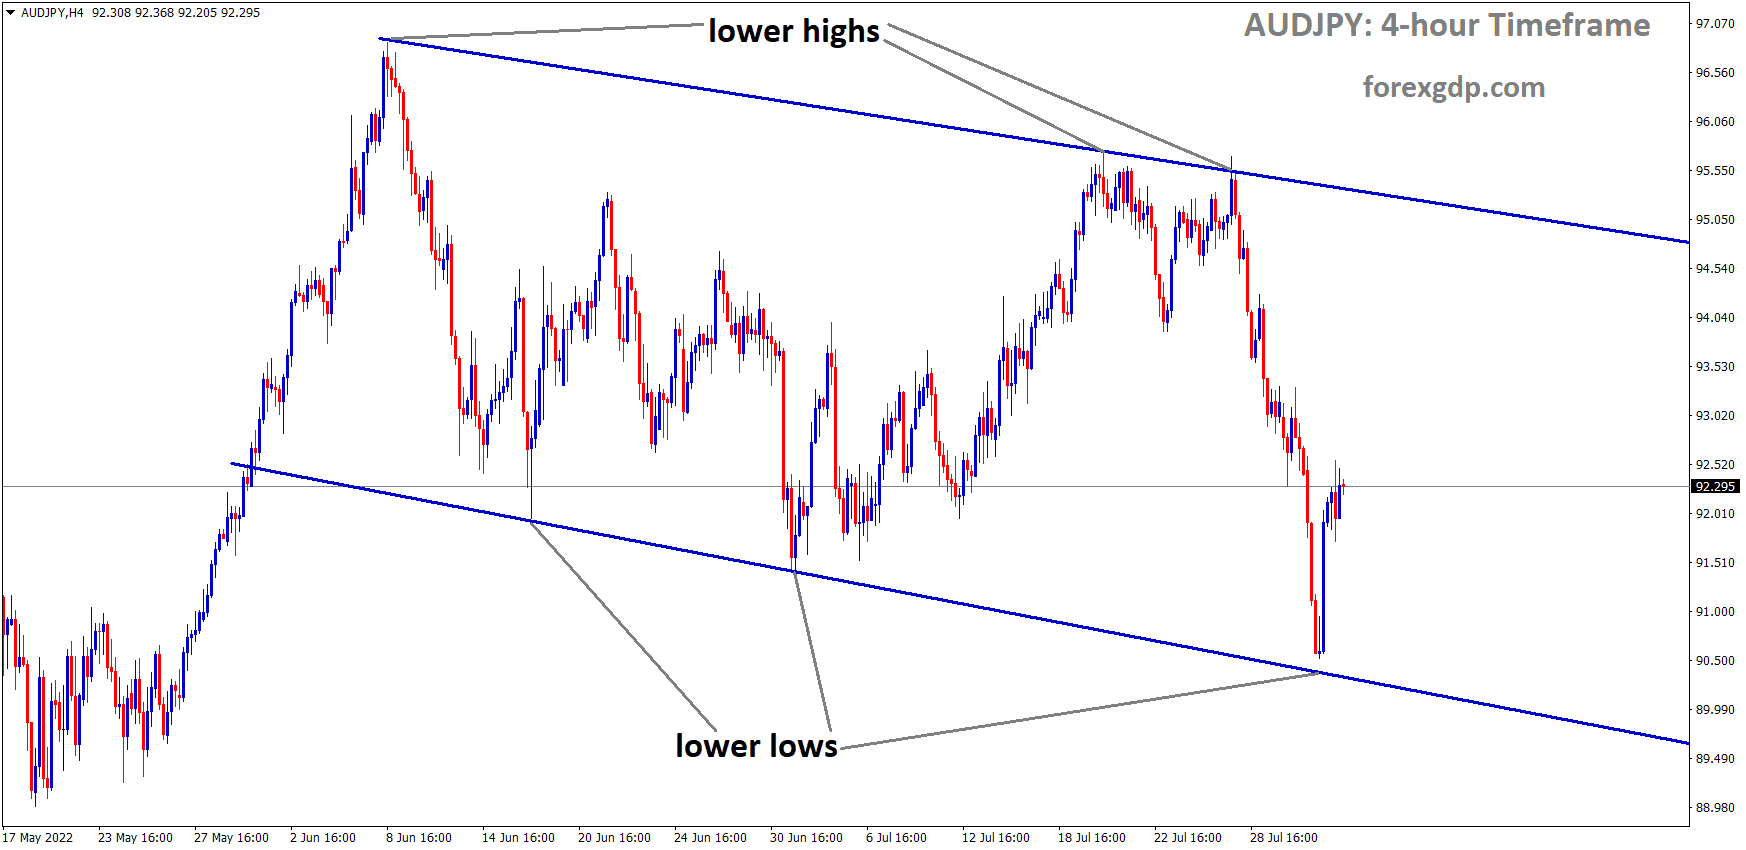 AUDJPY is moving in the Descending channel and the Market has rebounded from the lower low area of the channel